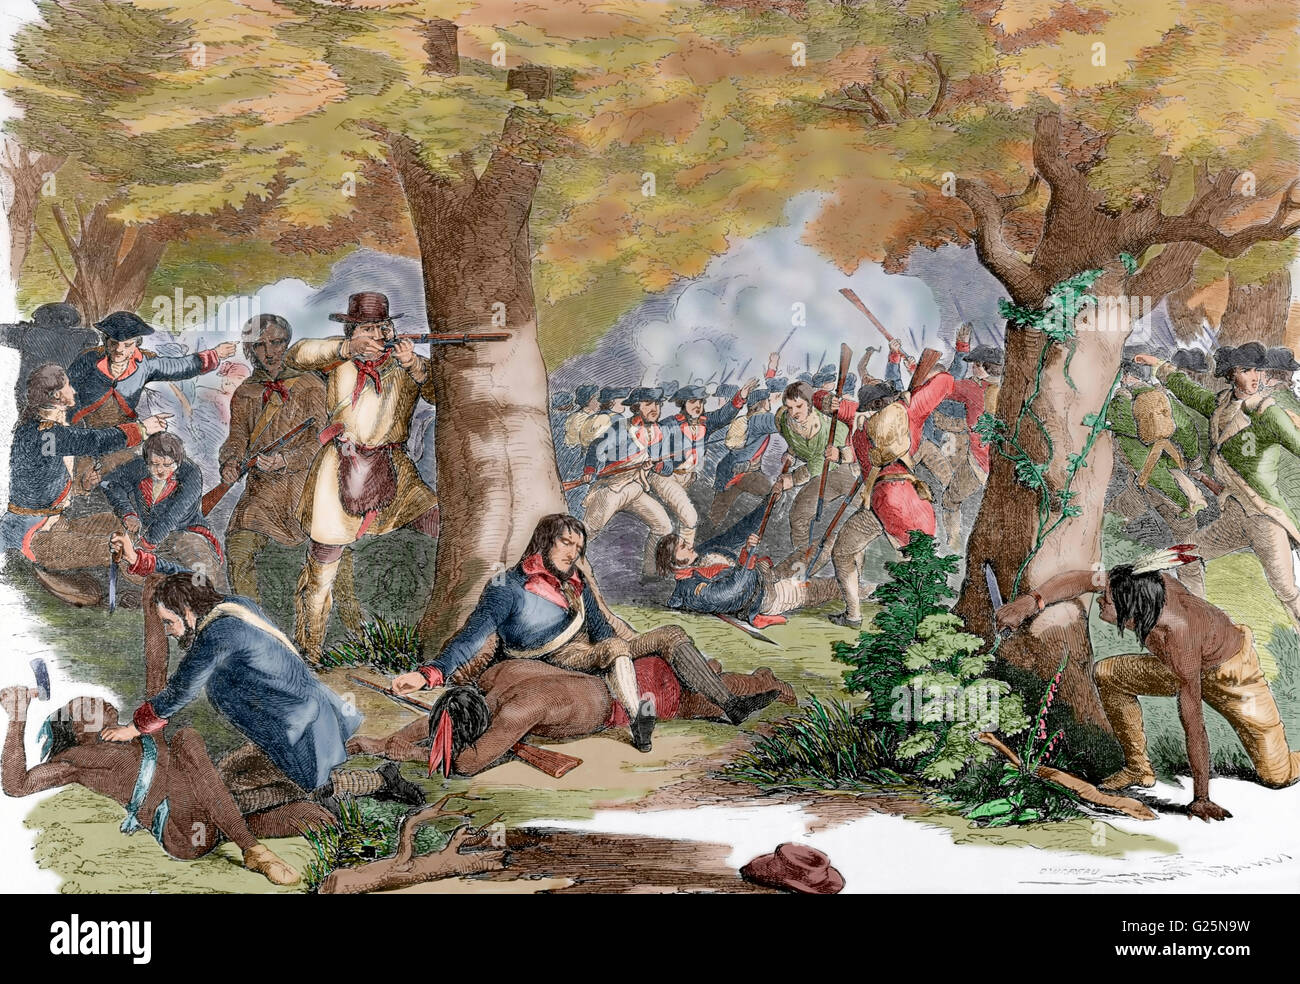 American Revolutionary War (1775-1783). Battle of Oriskany (August 6, 1777). Fight between Loyalists and allied Indians against Patriots and allied Oneida in the absence of British soldiers. Death of Brigadier General Nicholas Herkimer (1728-1777). Engraving by Damoreau. Colored. Stock Photo